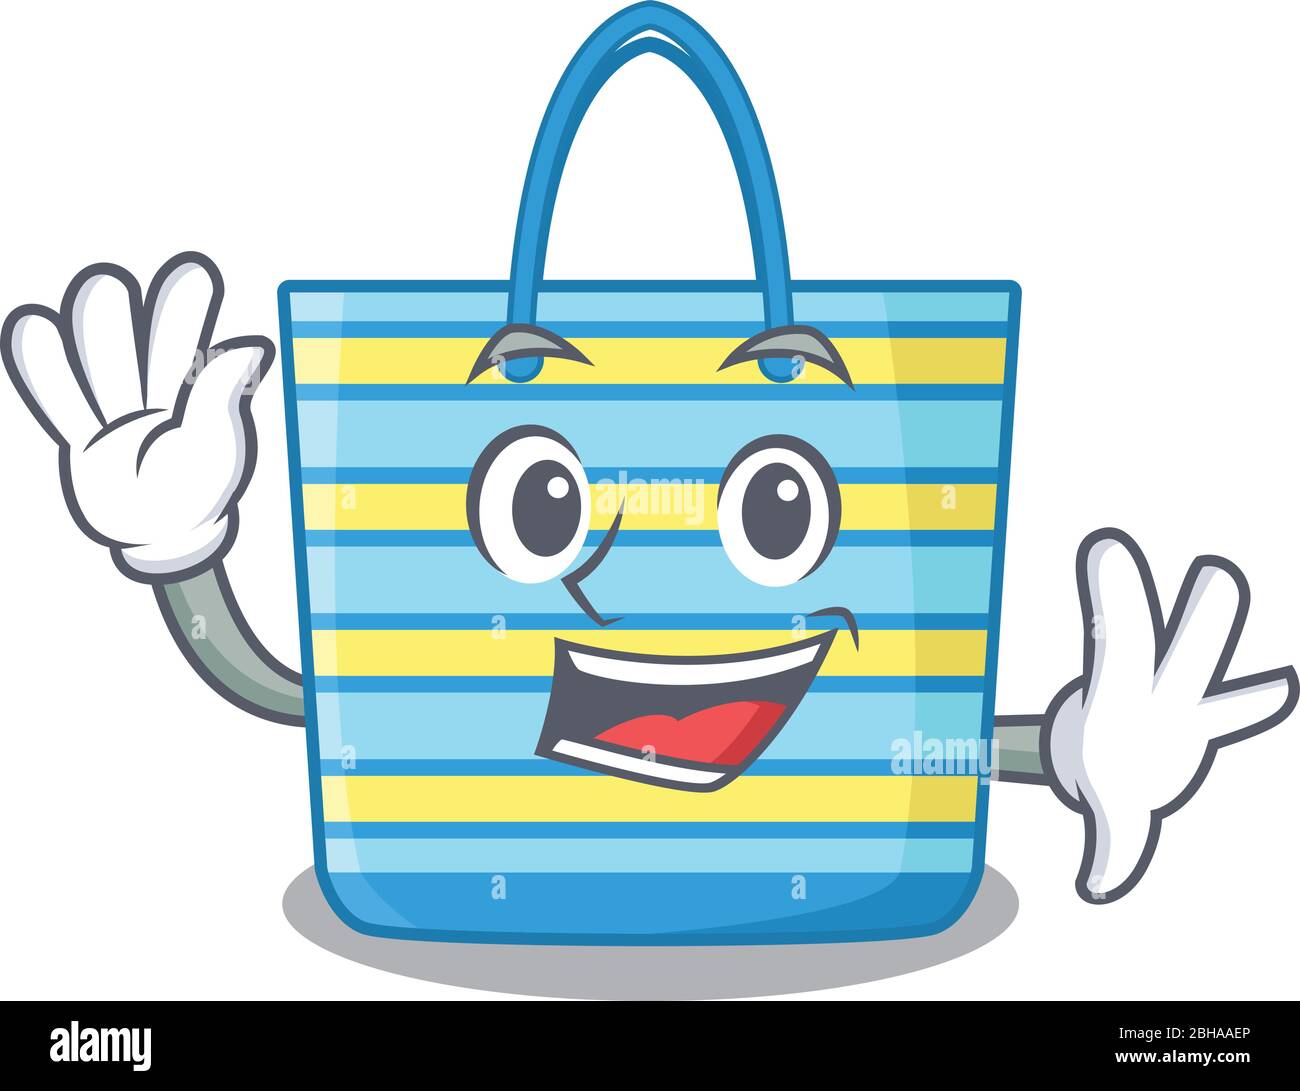 A charismatic beach bag mascot design style smiling and waving hand Stock Vector